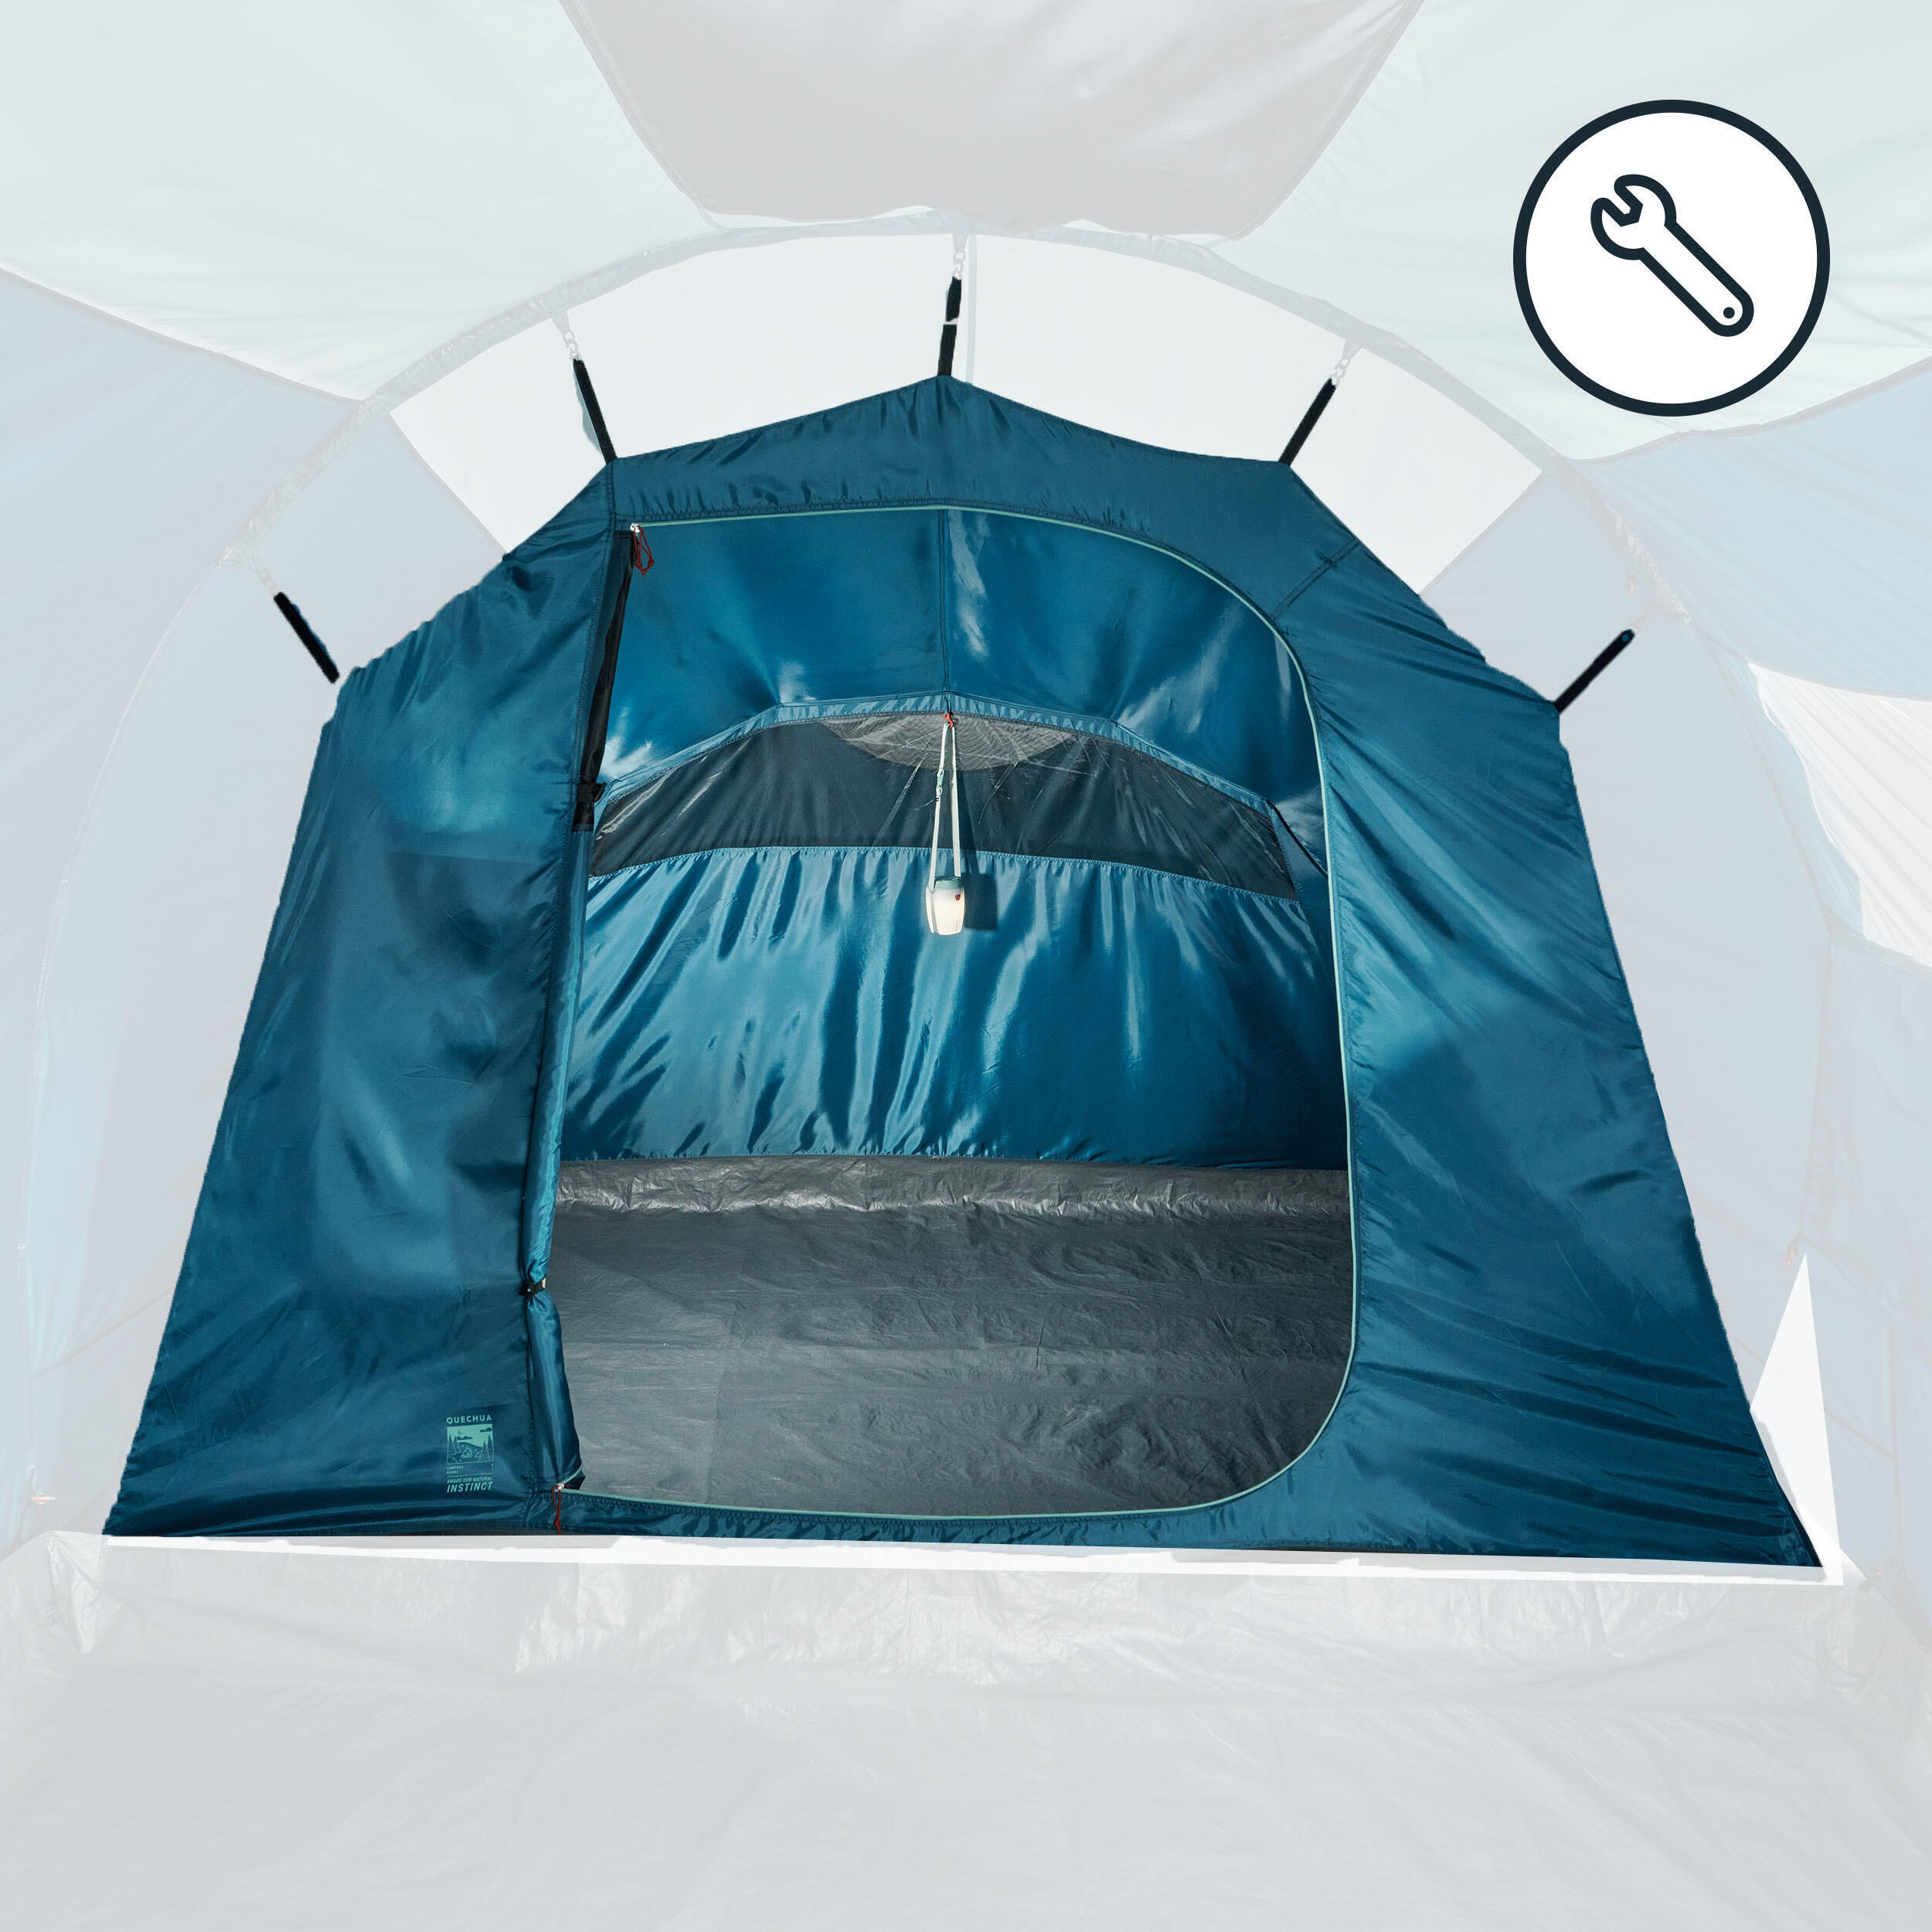 QUECHUA BEDROOM - SPARE PART FOR THE ARPENAZ 4.1 TENT